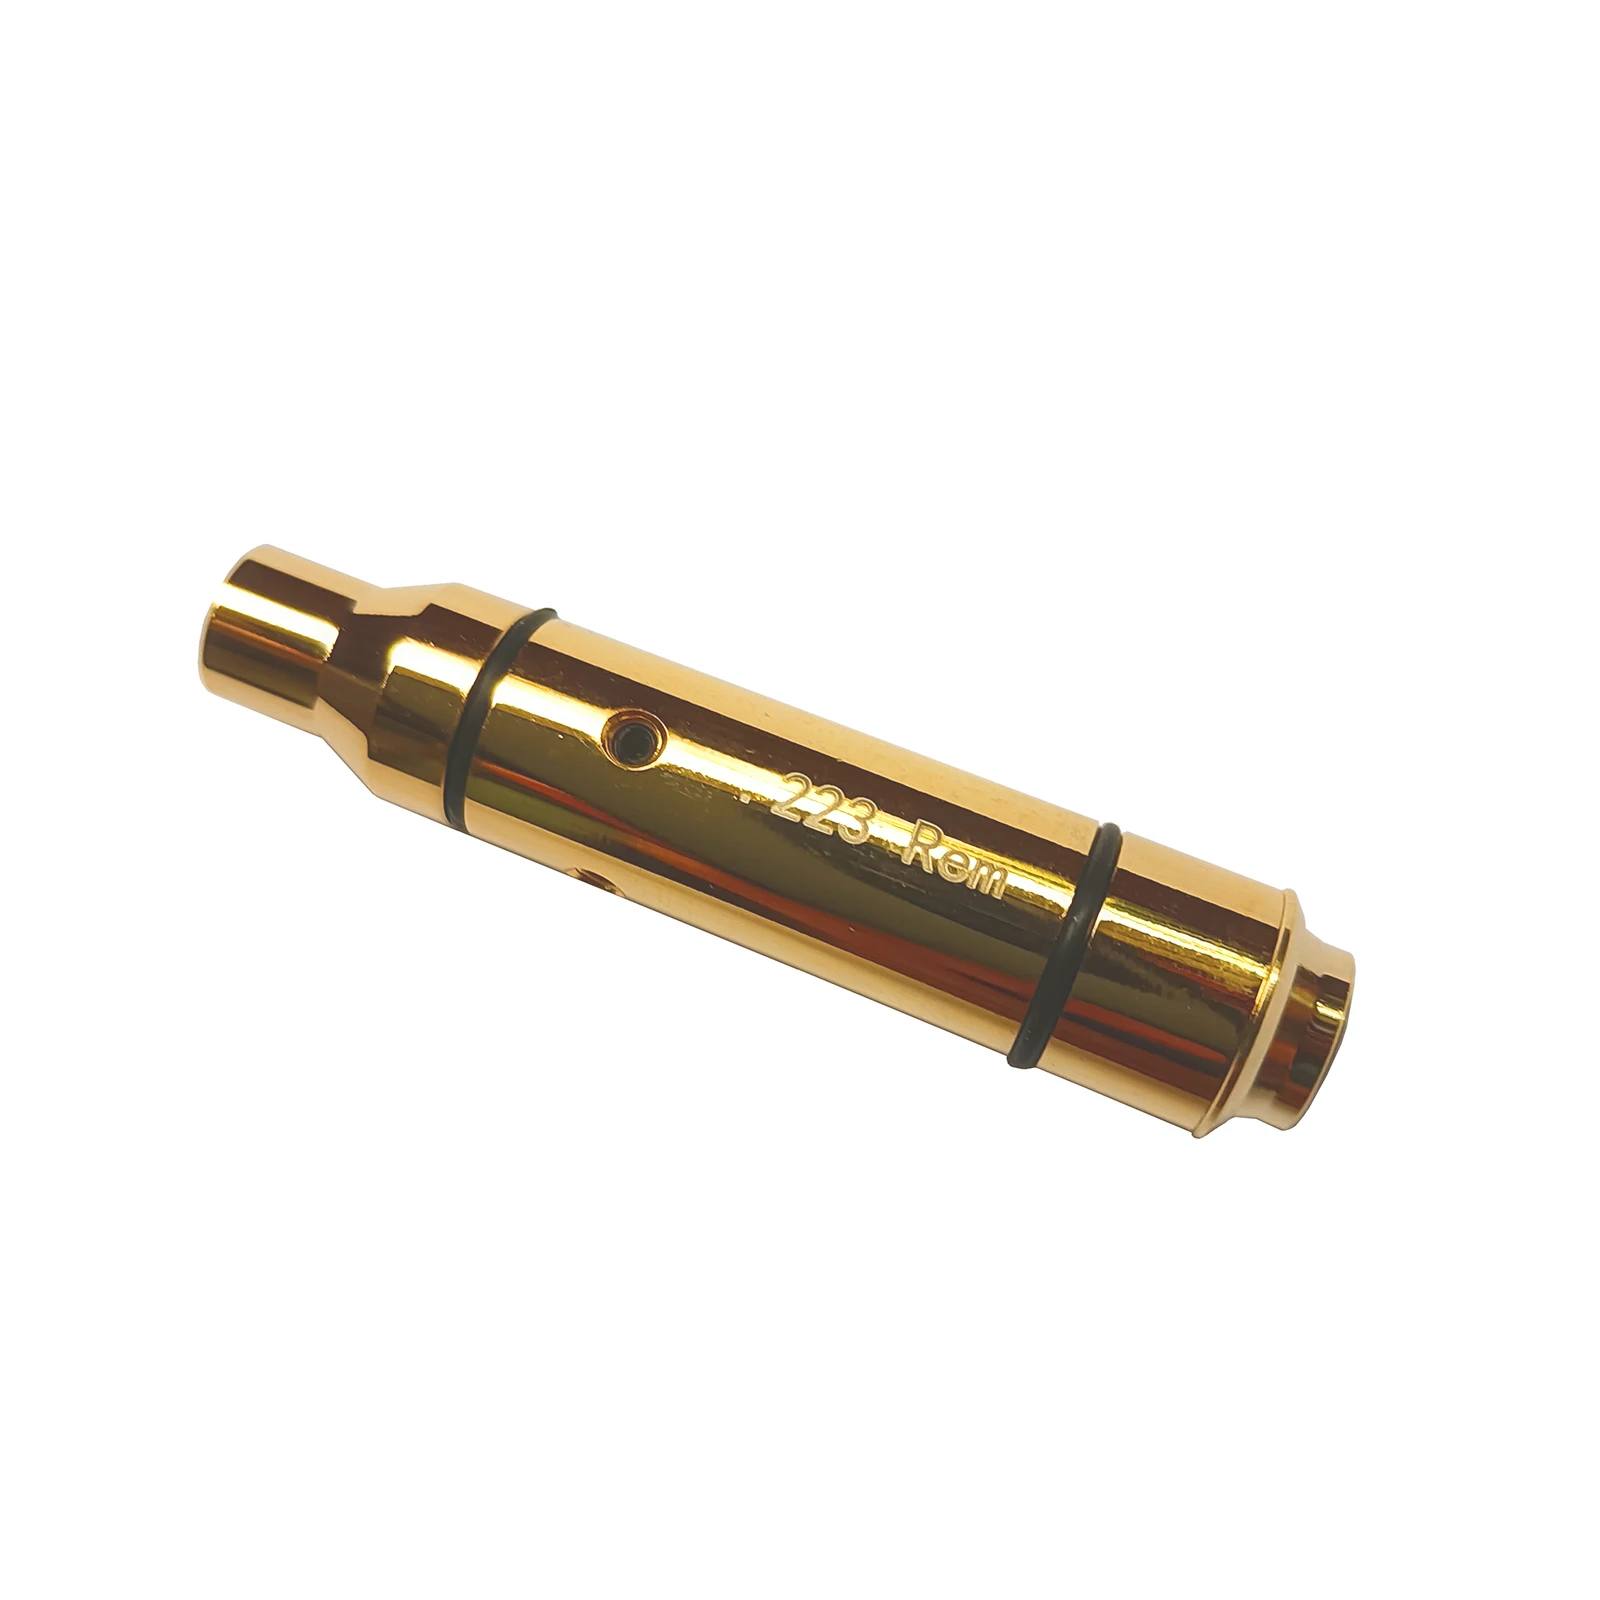 

9mm laser Cartridge bullet Paintball Airsoft for Armored Military Tactical indoor dry fire shooting Training, Gold